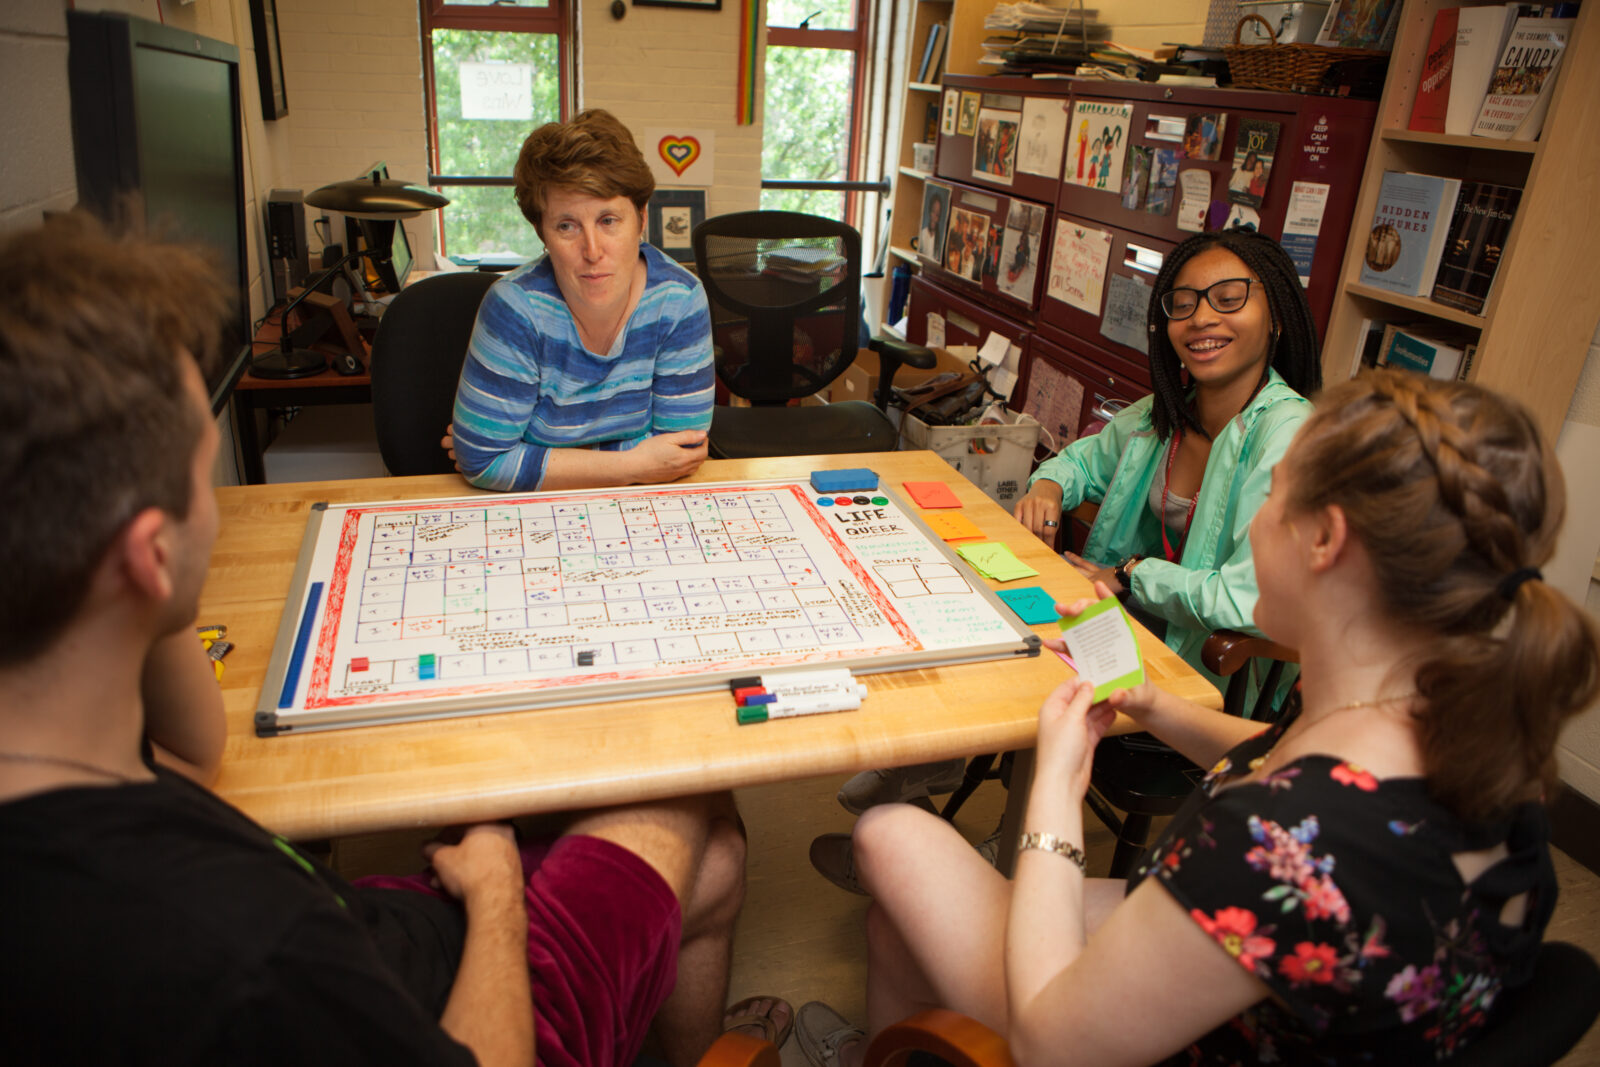 Amy Hillier working with SexGen Policy Lab interns to test out a board game that models how to discuss gender.